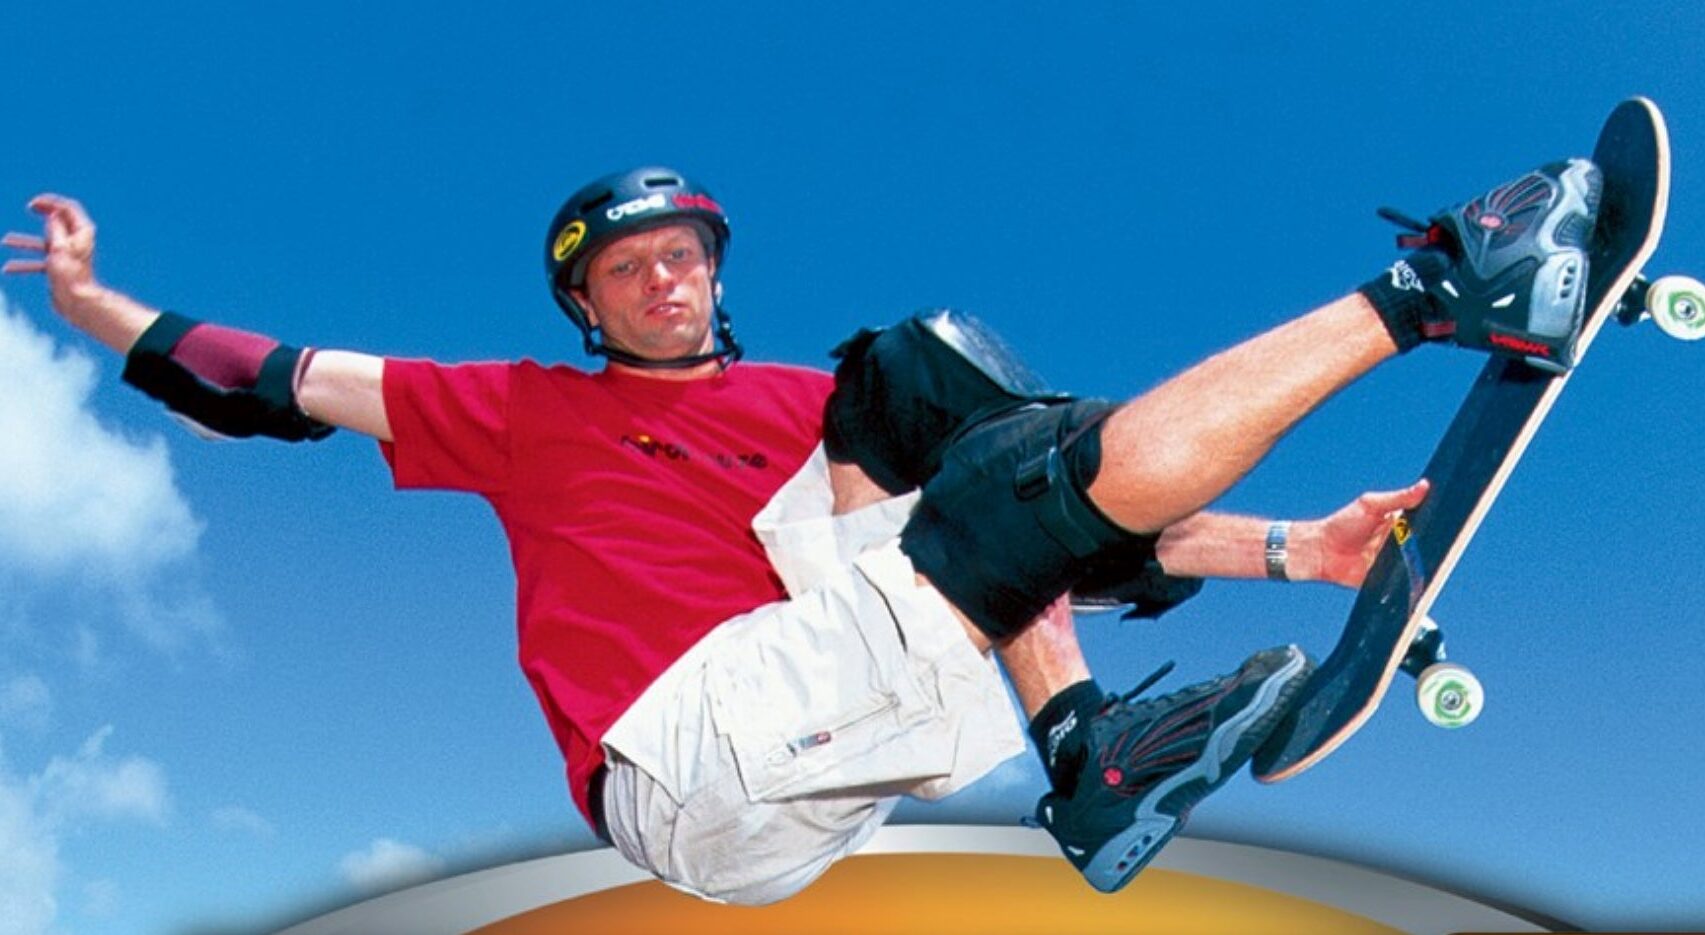 Tony Hawk reveals life-changing money he made from Activision's